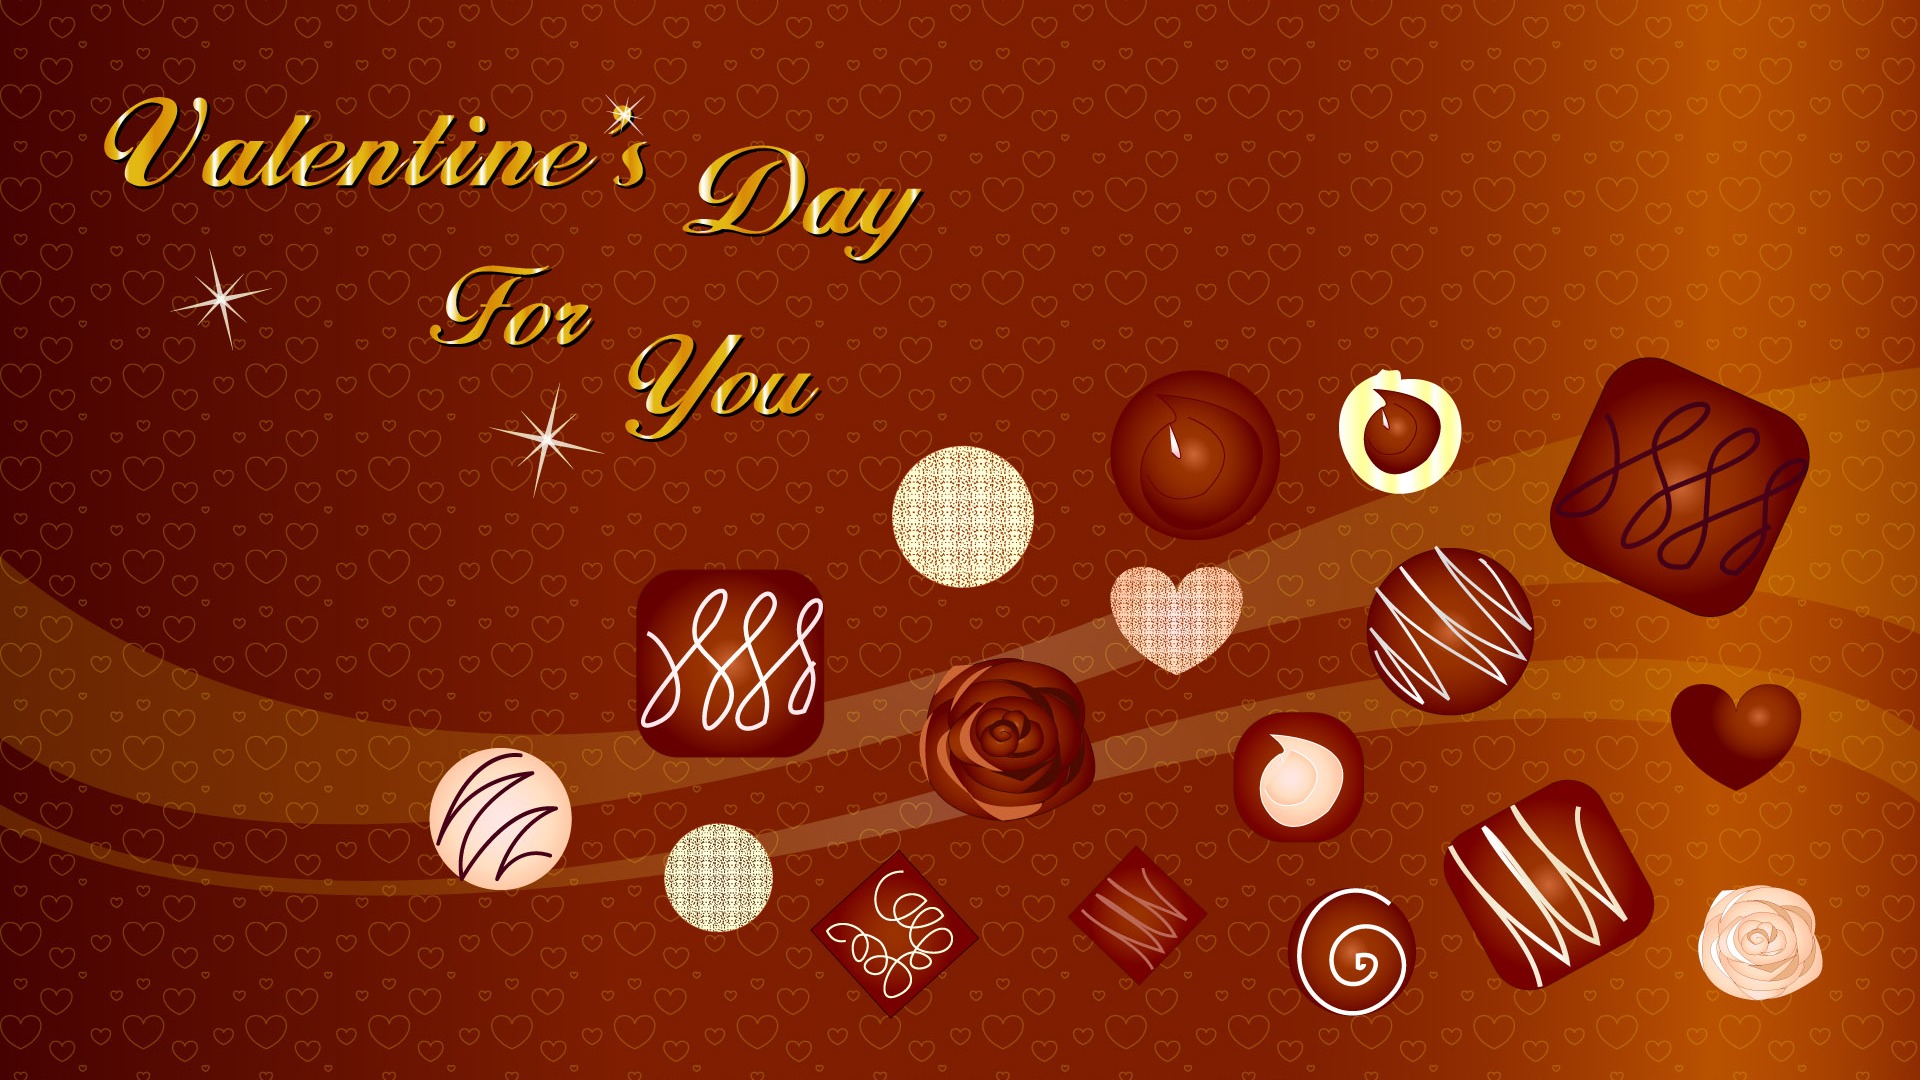 Valentine's Day Theme Wallpapers (1) #3 - 1920x1080